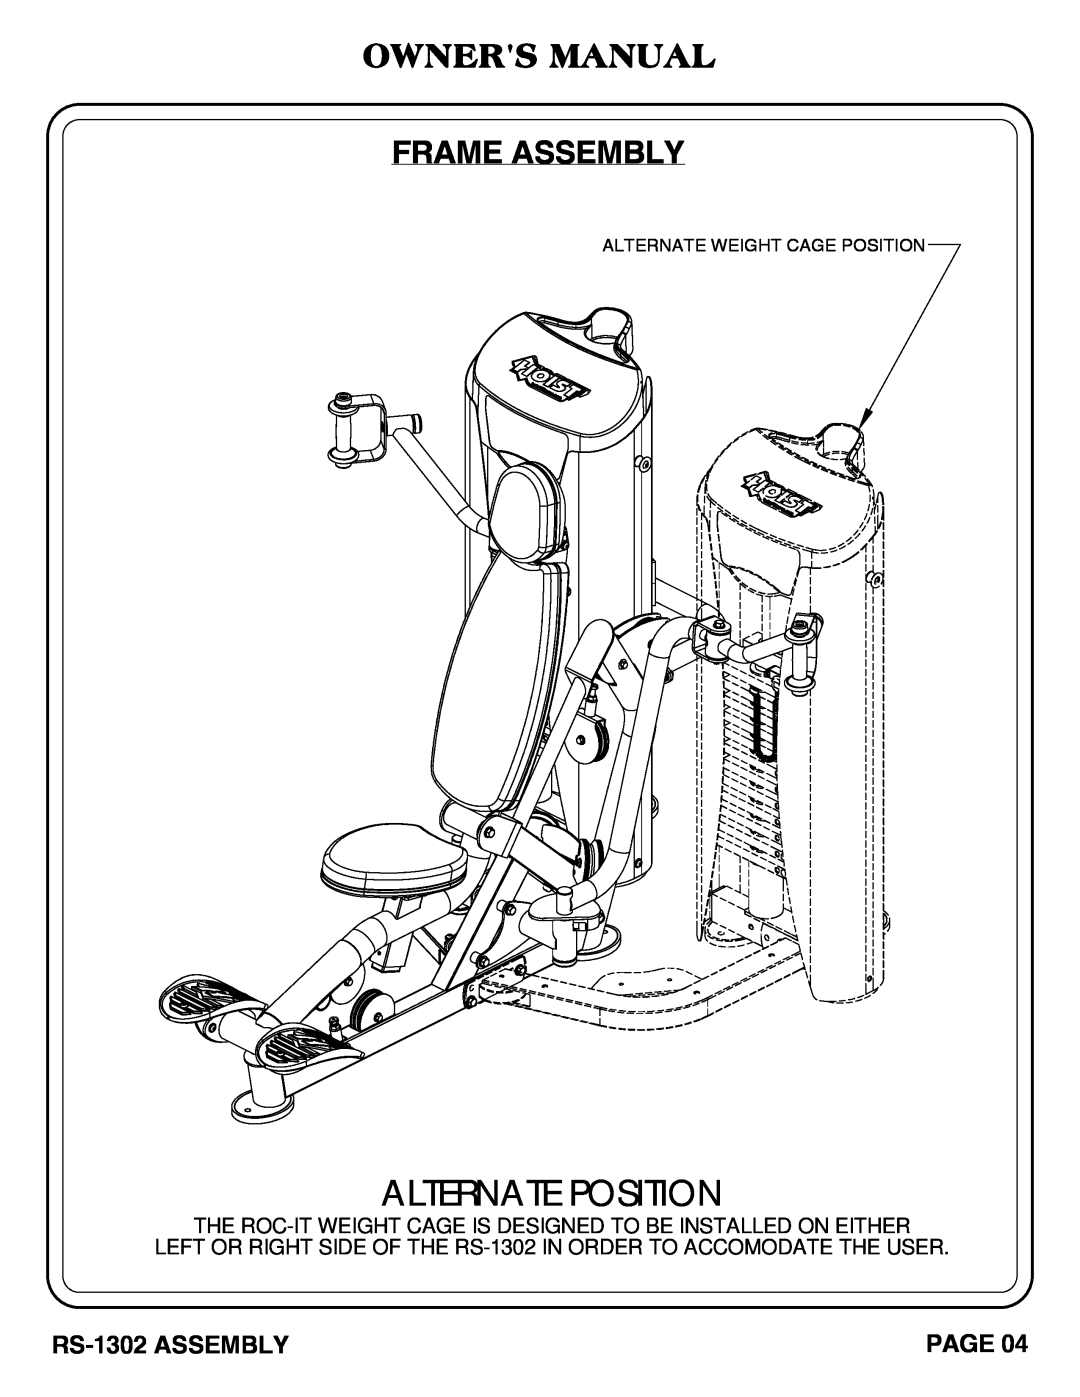 Hoist Fitness RS-1302 owner manual Owners Manual Frame Assembly, Alternate Position, Page 